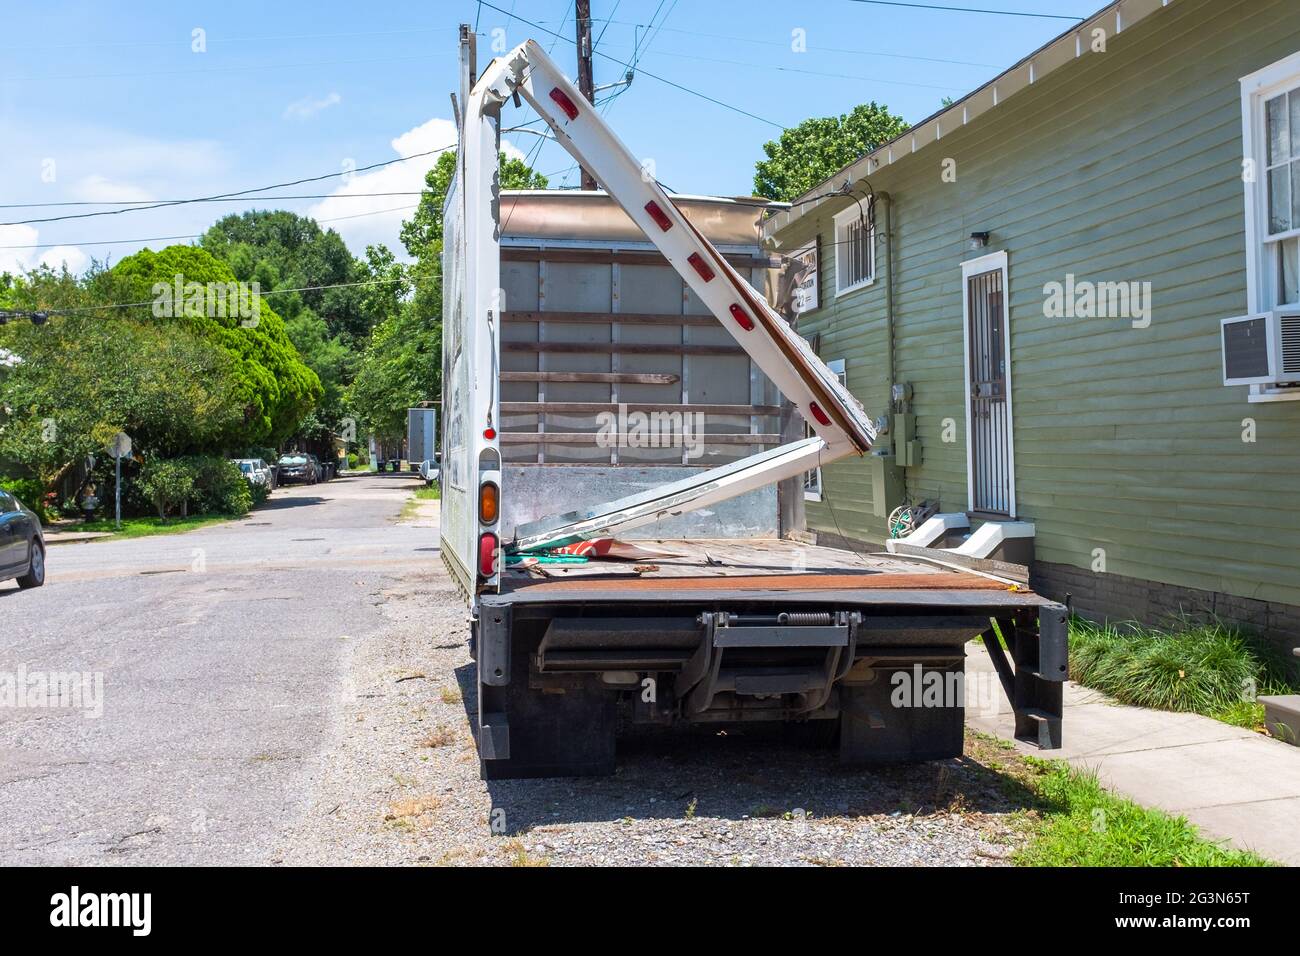 NEW ORLEANS, LA, USA - June 10, 2021: Severely damaged box truck with top, back and sides torn off. Stock Photo